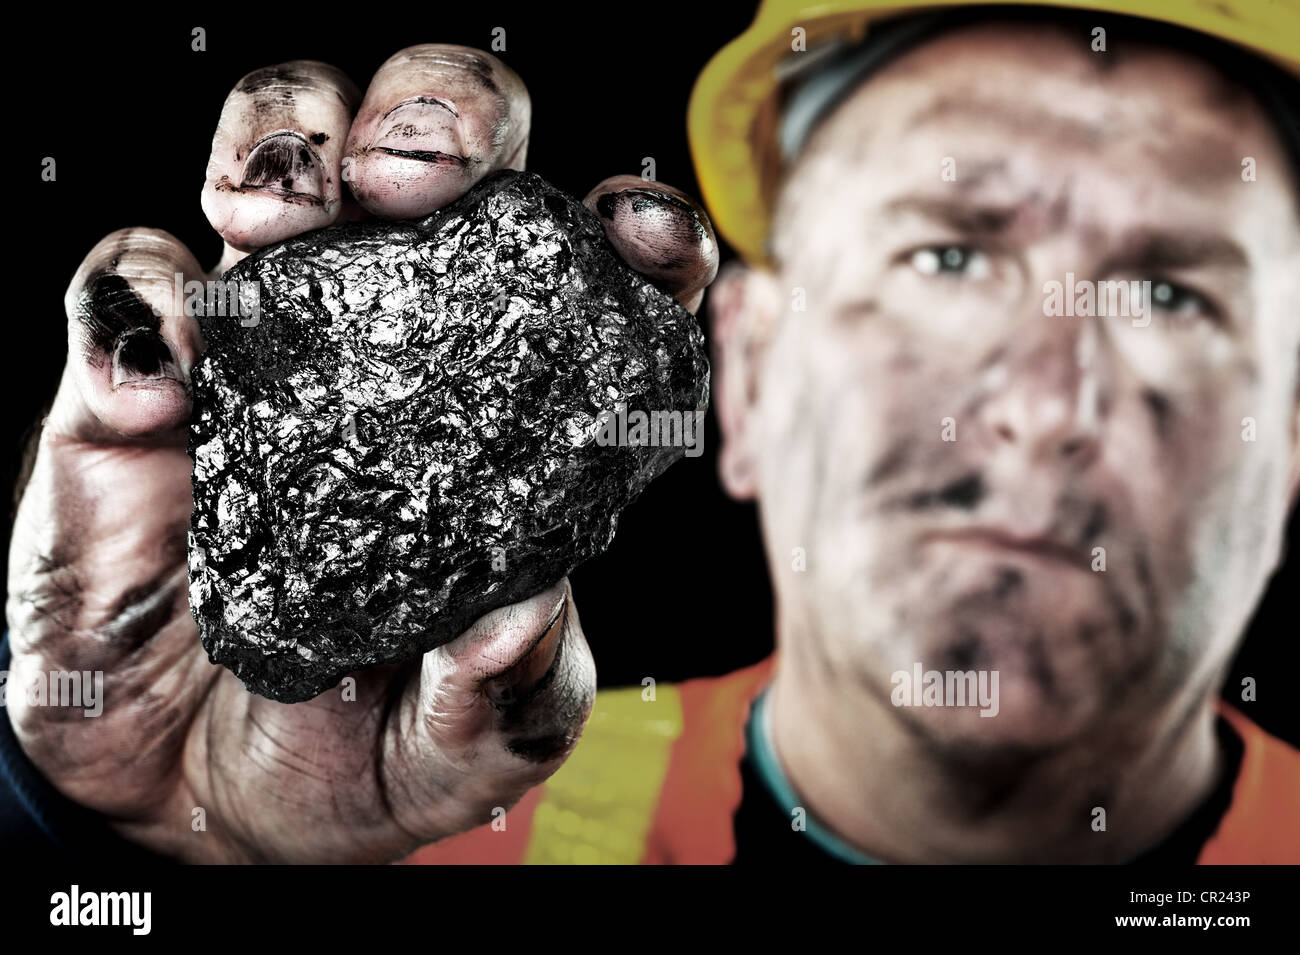 A dirty coalminer displays a lump of coal as a power and energy source. Stock Photo